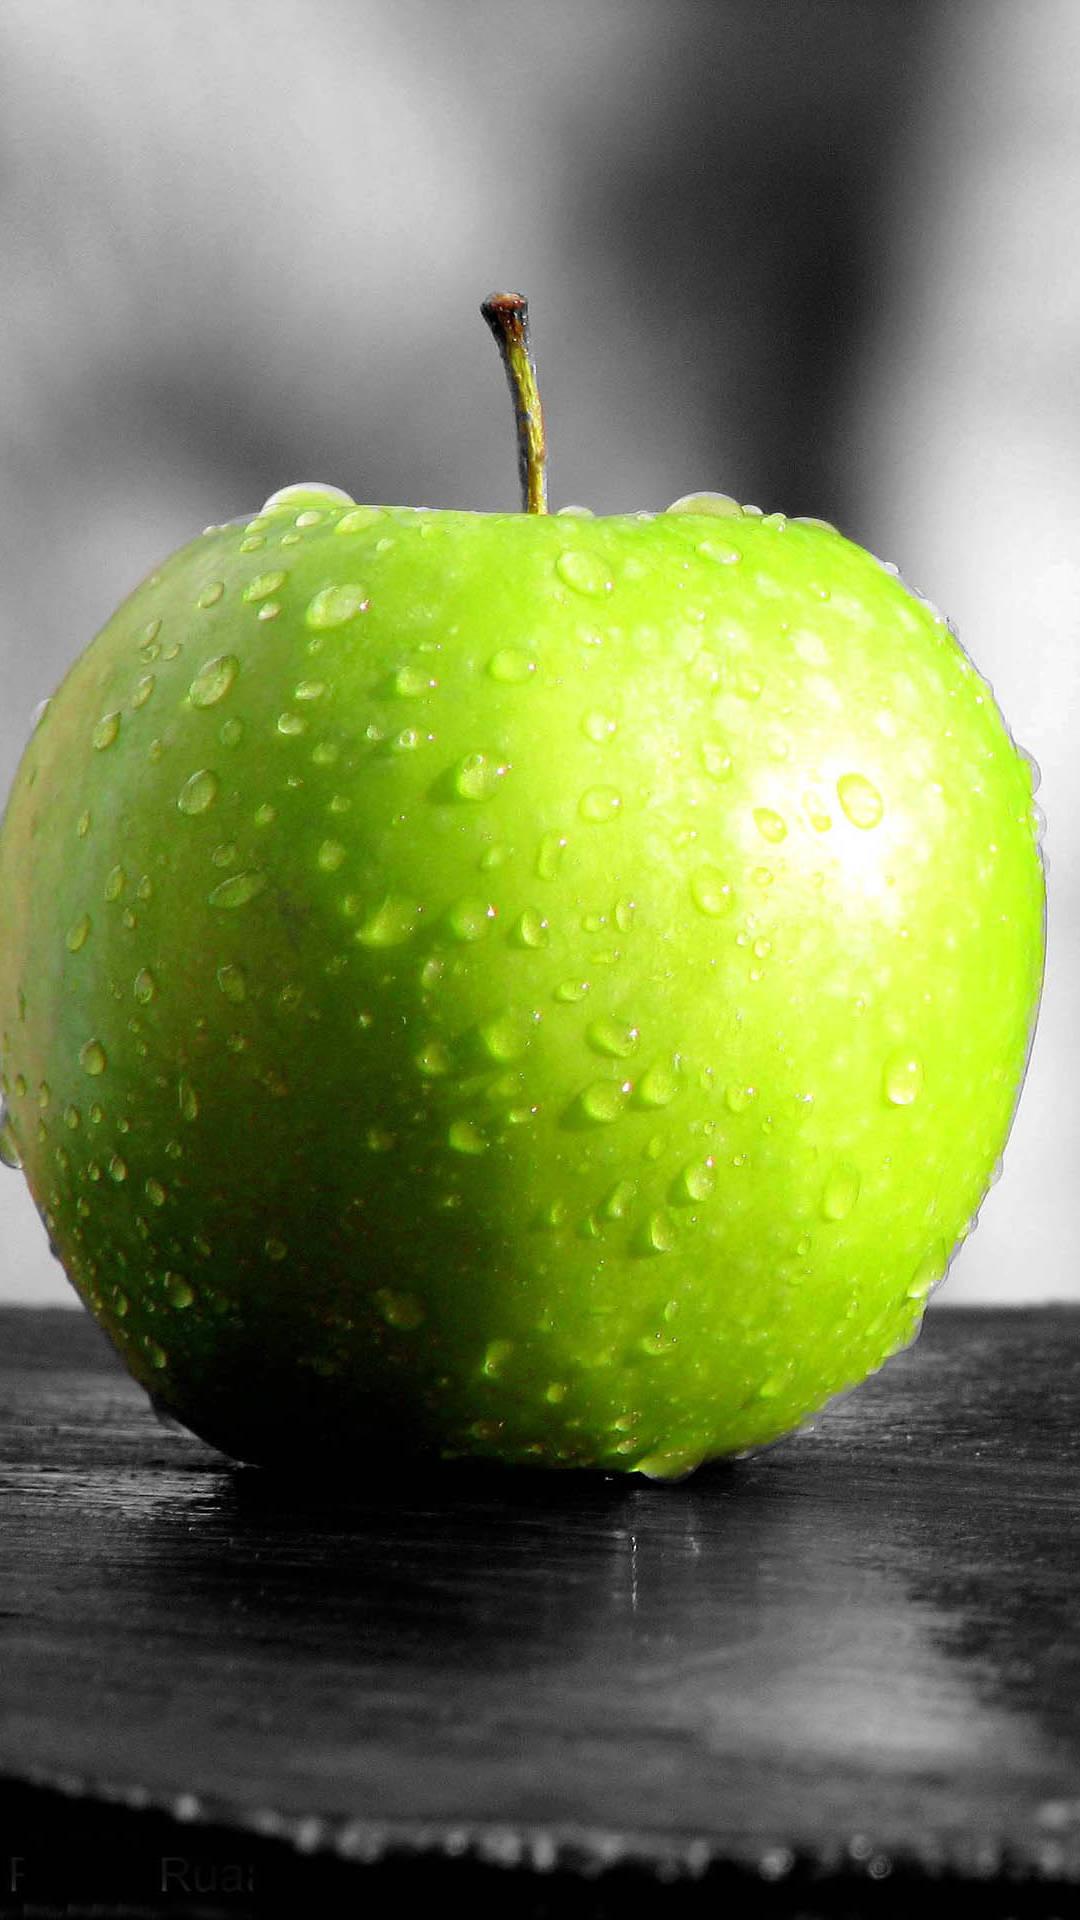 Apple Green Pictures | Download Free Images on Unsplash